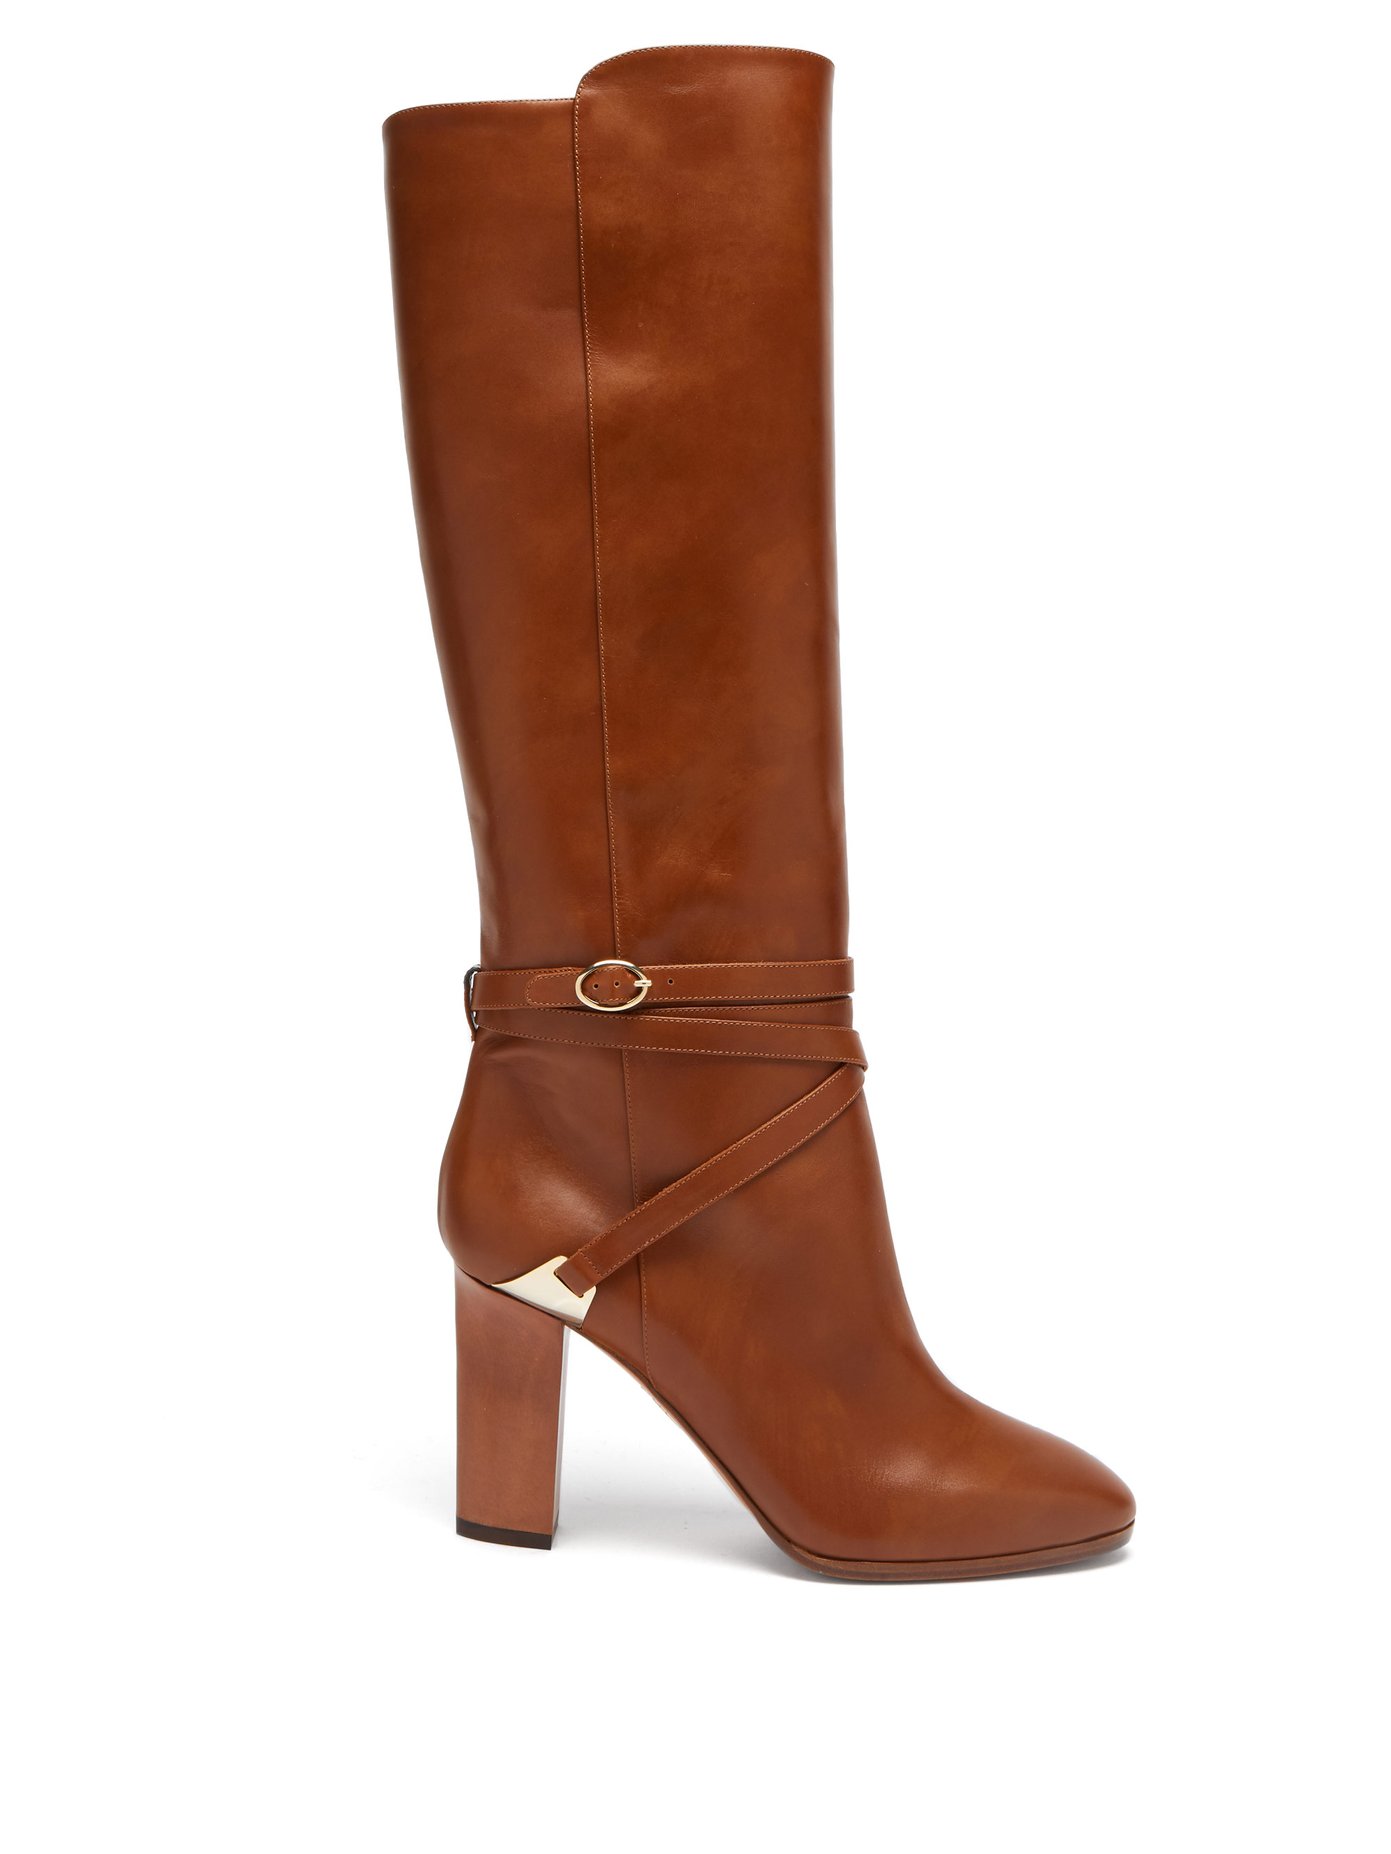 Saddle 90 leather below-the-knee boots 